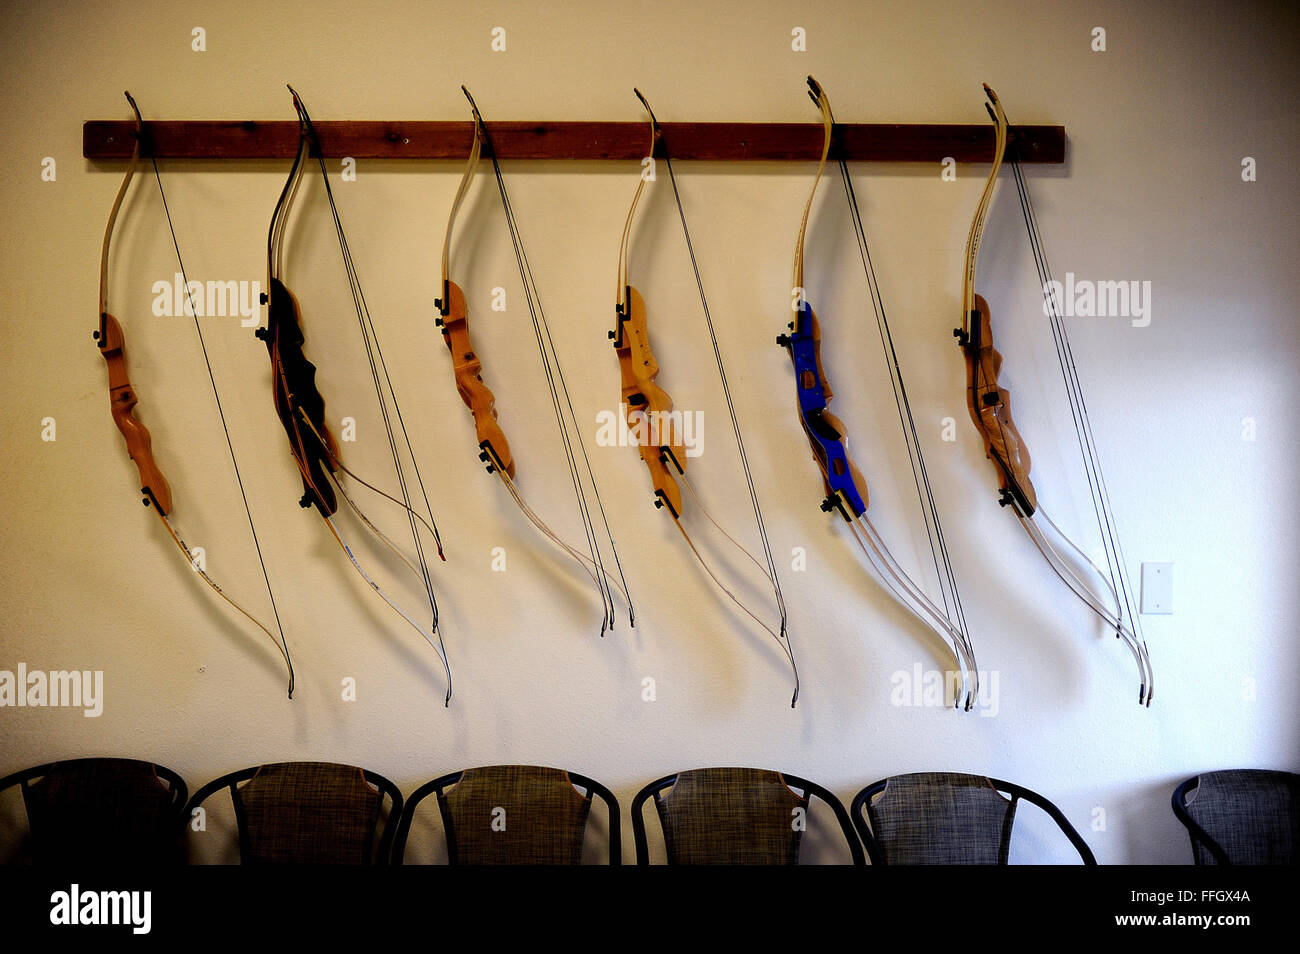 During the Air Force team's selection camp for Warrior Games, Air Force athletes' bows hang from the wall at the U.S. Air Force Academy archery range. Stock Photo